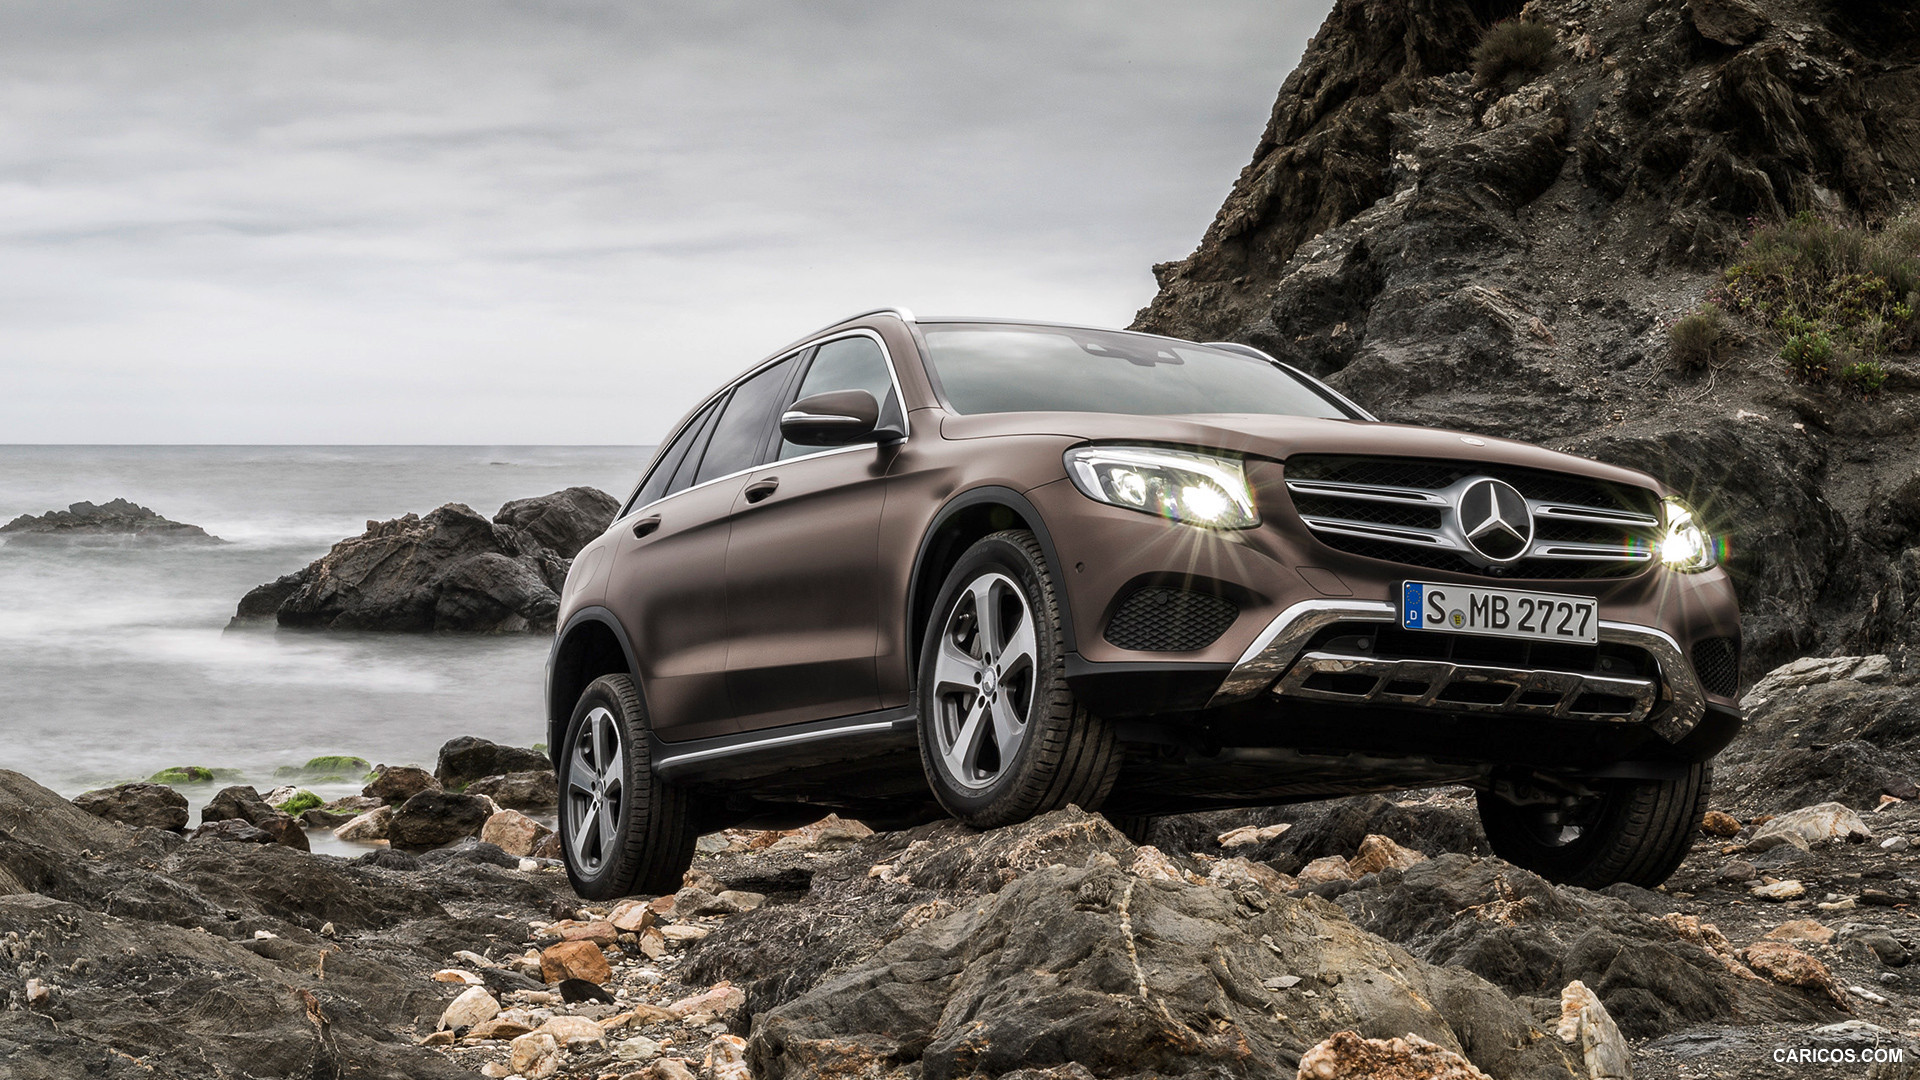 2016 Mercedes-Benz GLC-Class GLC 250d 4MATIC (Citrine Brown Magno, Offroad Line) - Front, #23 of 254